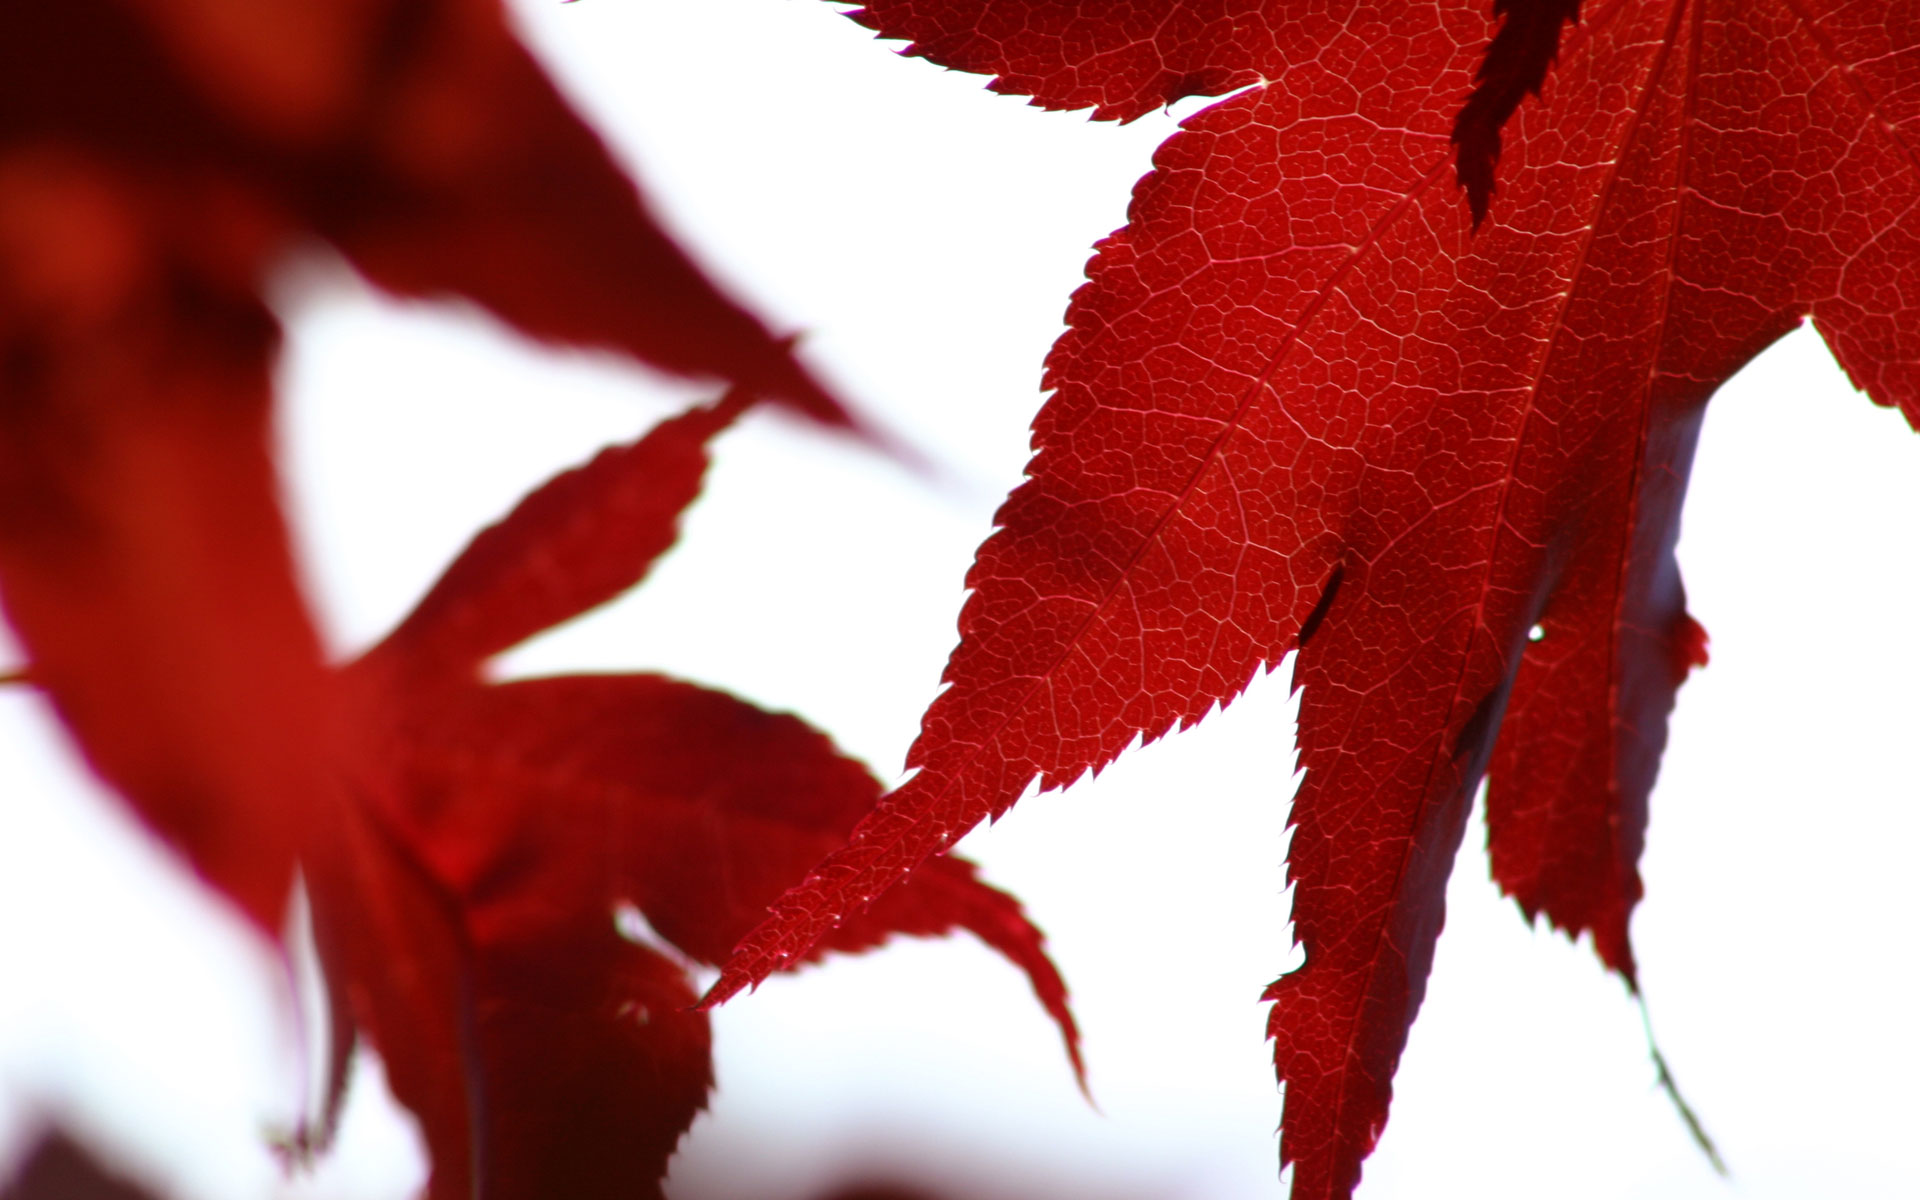 1400+ Leaf HD Wallpapers and Backgrounds